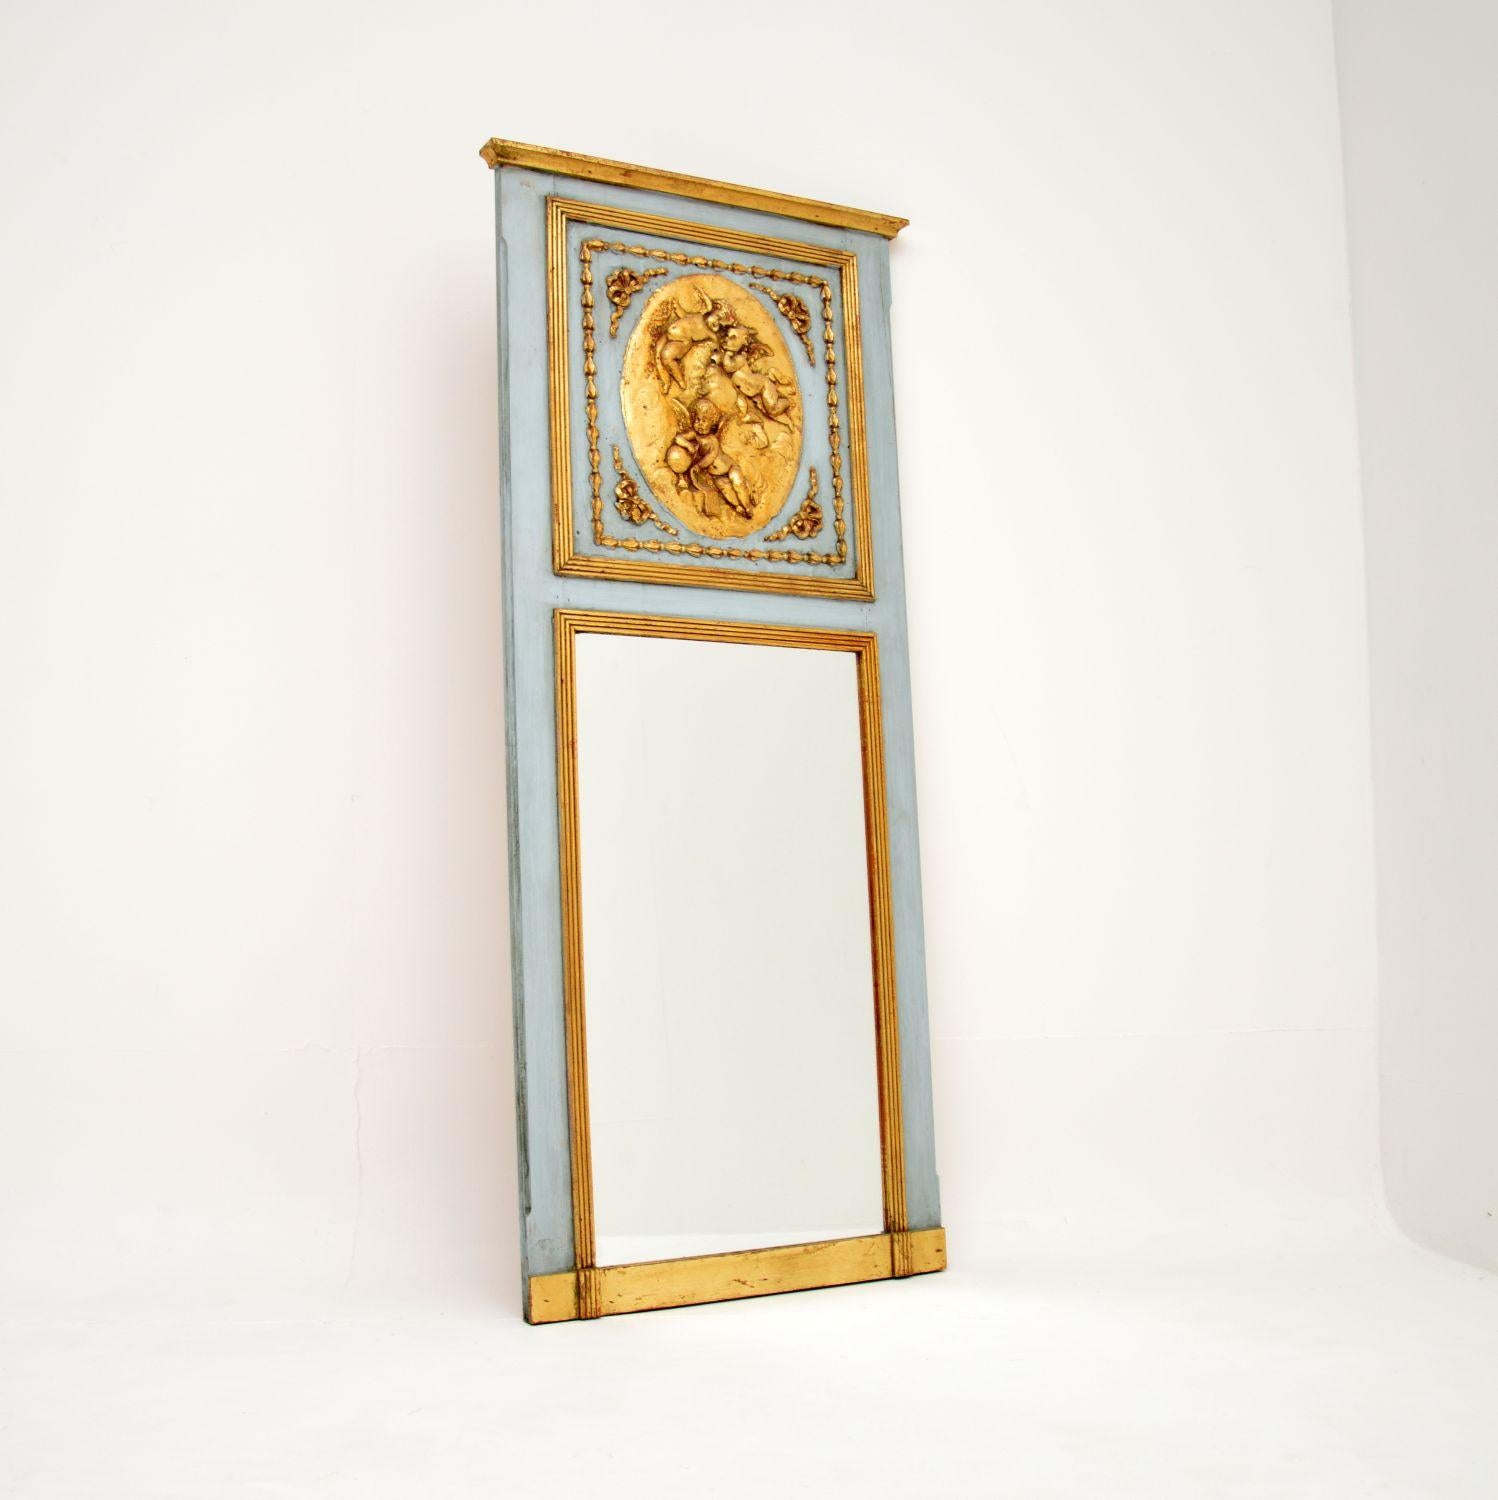 A stunning antique French slim over mantle mirror by renowned sculptor Leon Bertaux (b. 1827). This dates from around the 1860-1880 period.

It is of amazing quality, with a gorgeous central carved plaque depicting three cherubs, with the artists